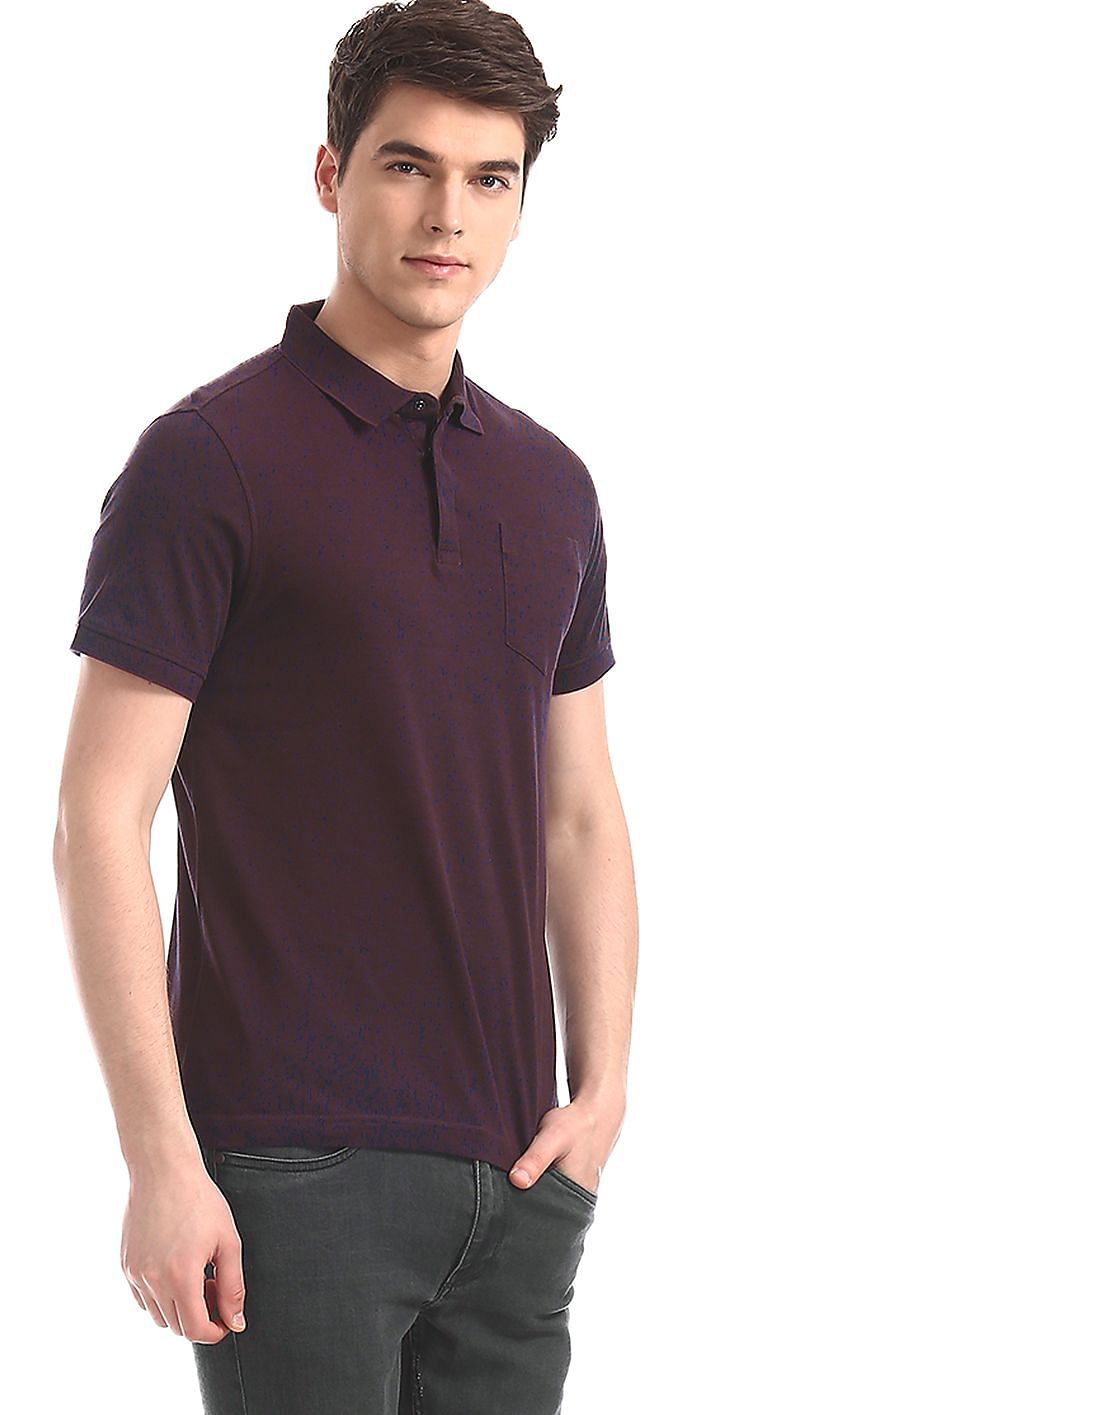 Buy Men Red Concealed Placket Solid Polo Shirt online at NNNOW.com